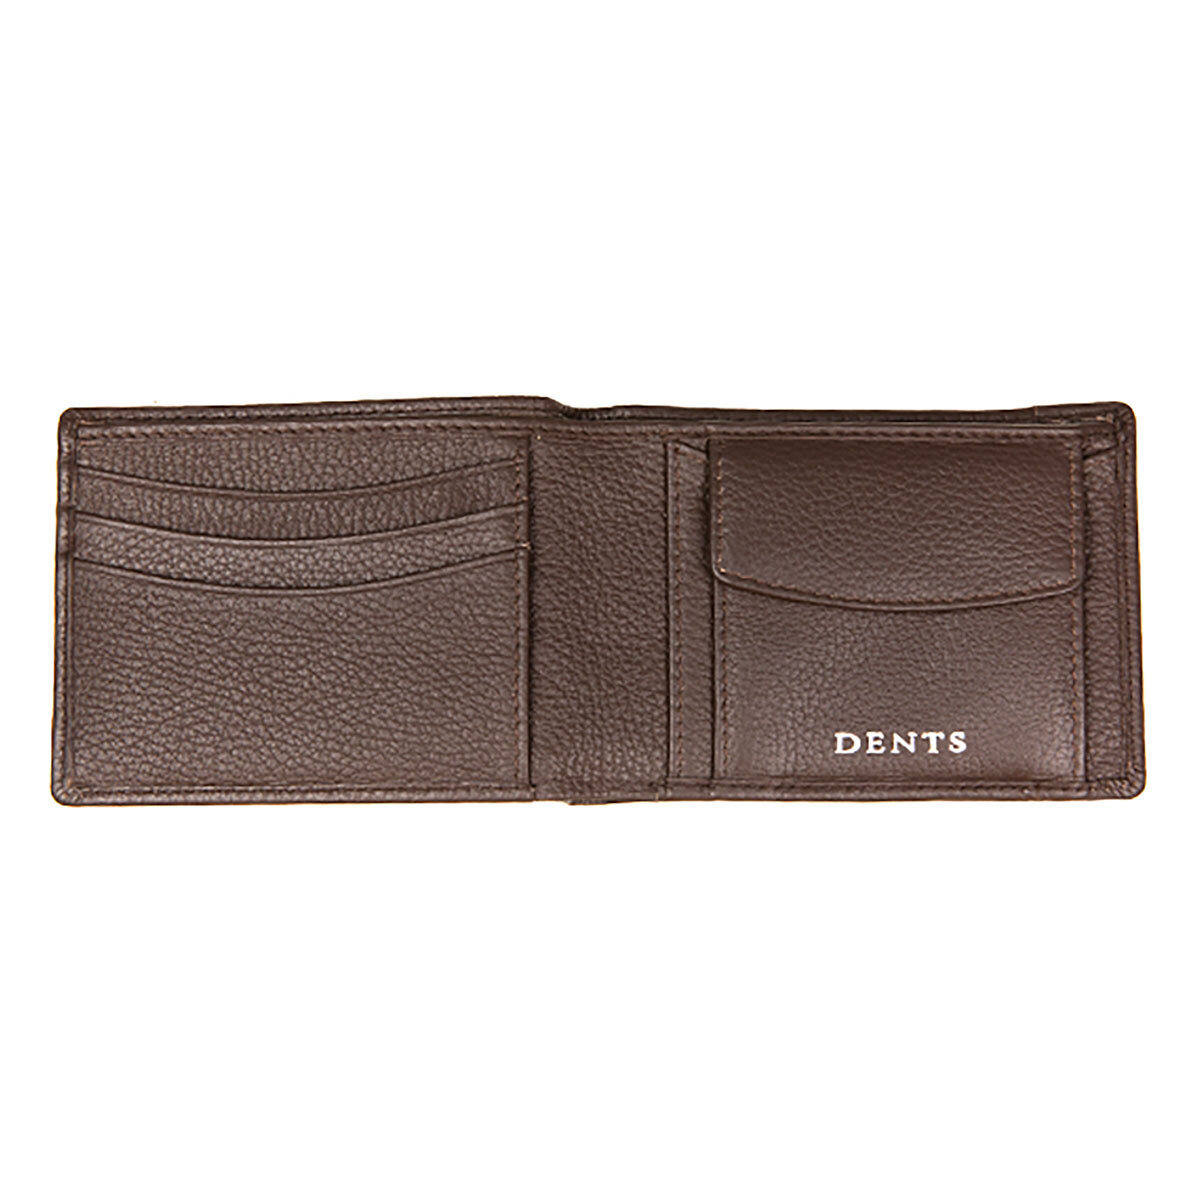 Dents Pebble Grain Leather Billfold Wallet with Removable Card Holder in 2 Colours